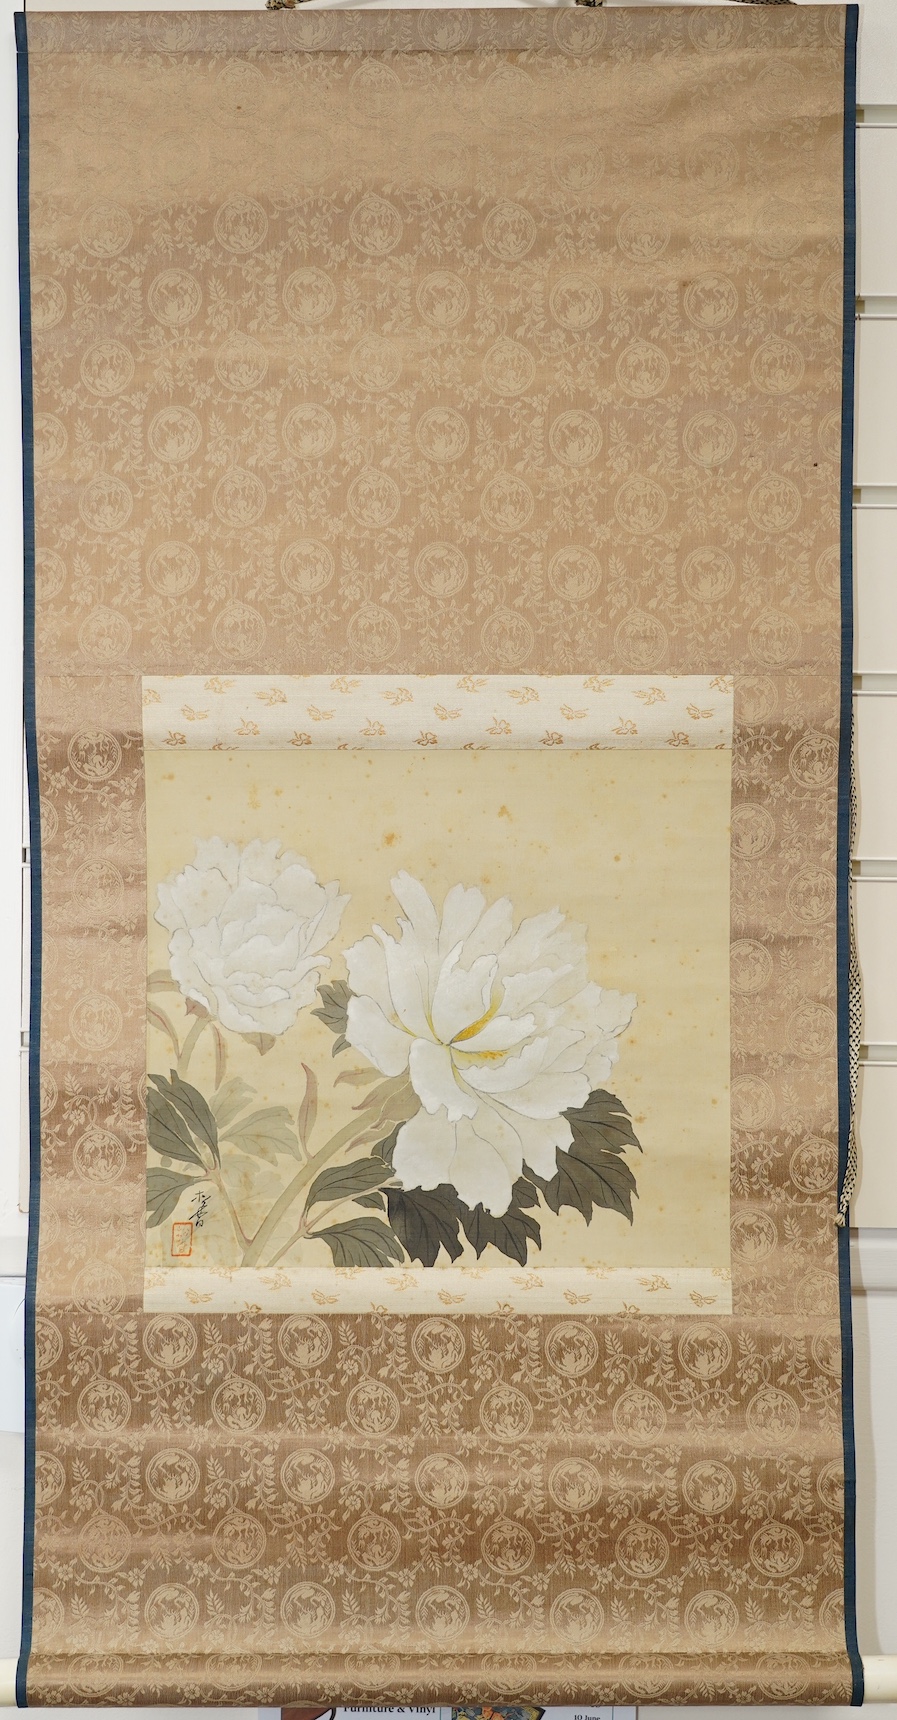 Five Japanese scroll paintings, 19th and 20th century, including two landscapes, birds, a flower study and a calligraphic inscription. Condition - ranging from poor to good